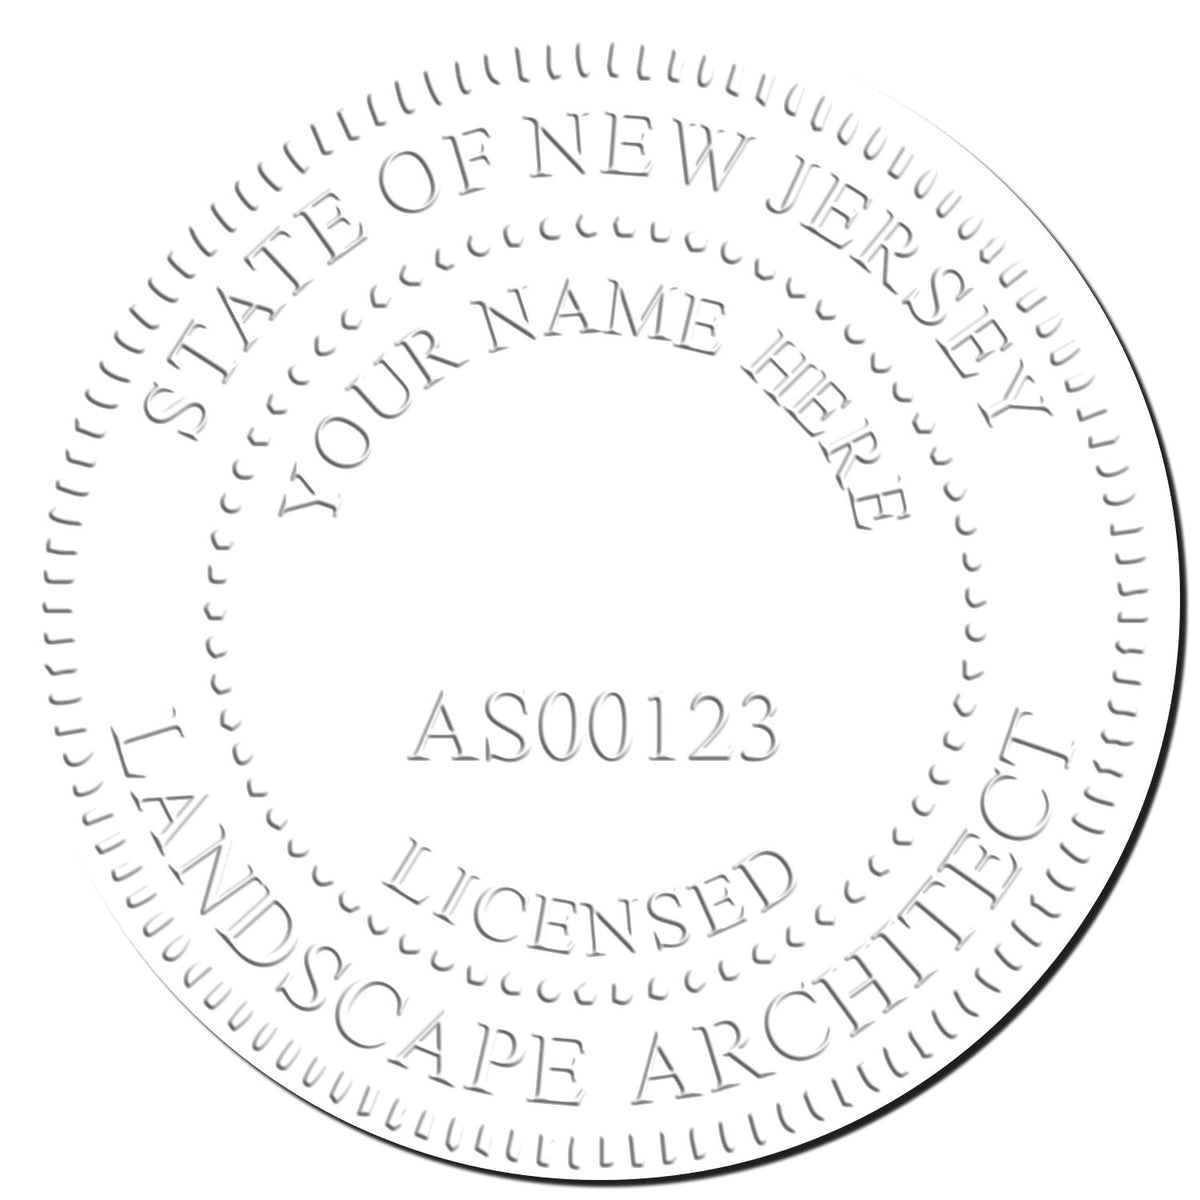 This paper is stamped with a sample imprint of the Gift New Jersey Landscape Architect Seal, signifying its quality and reliability.